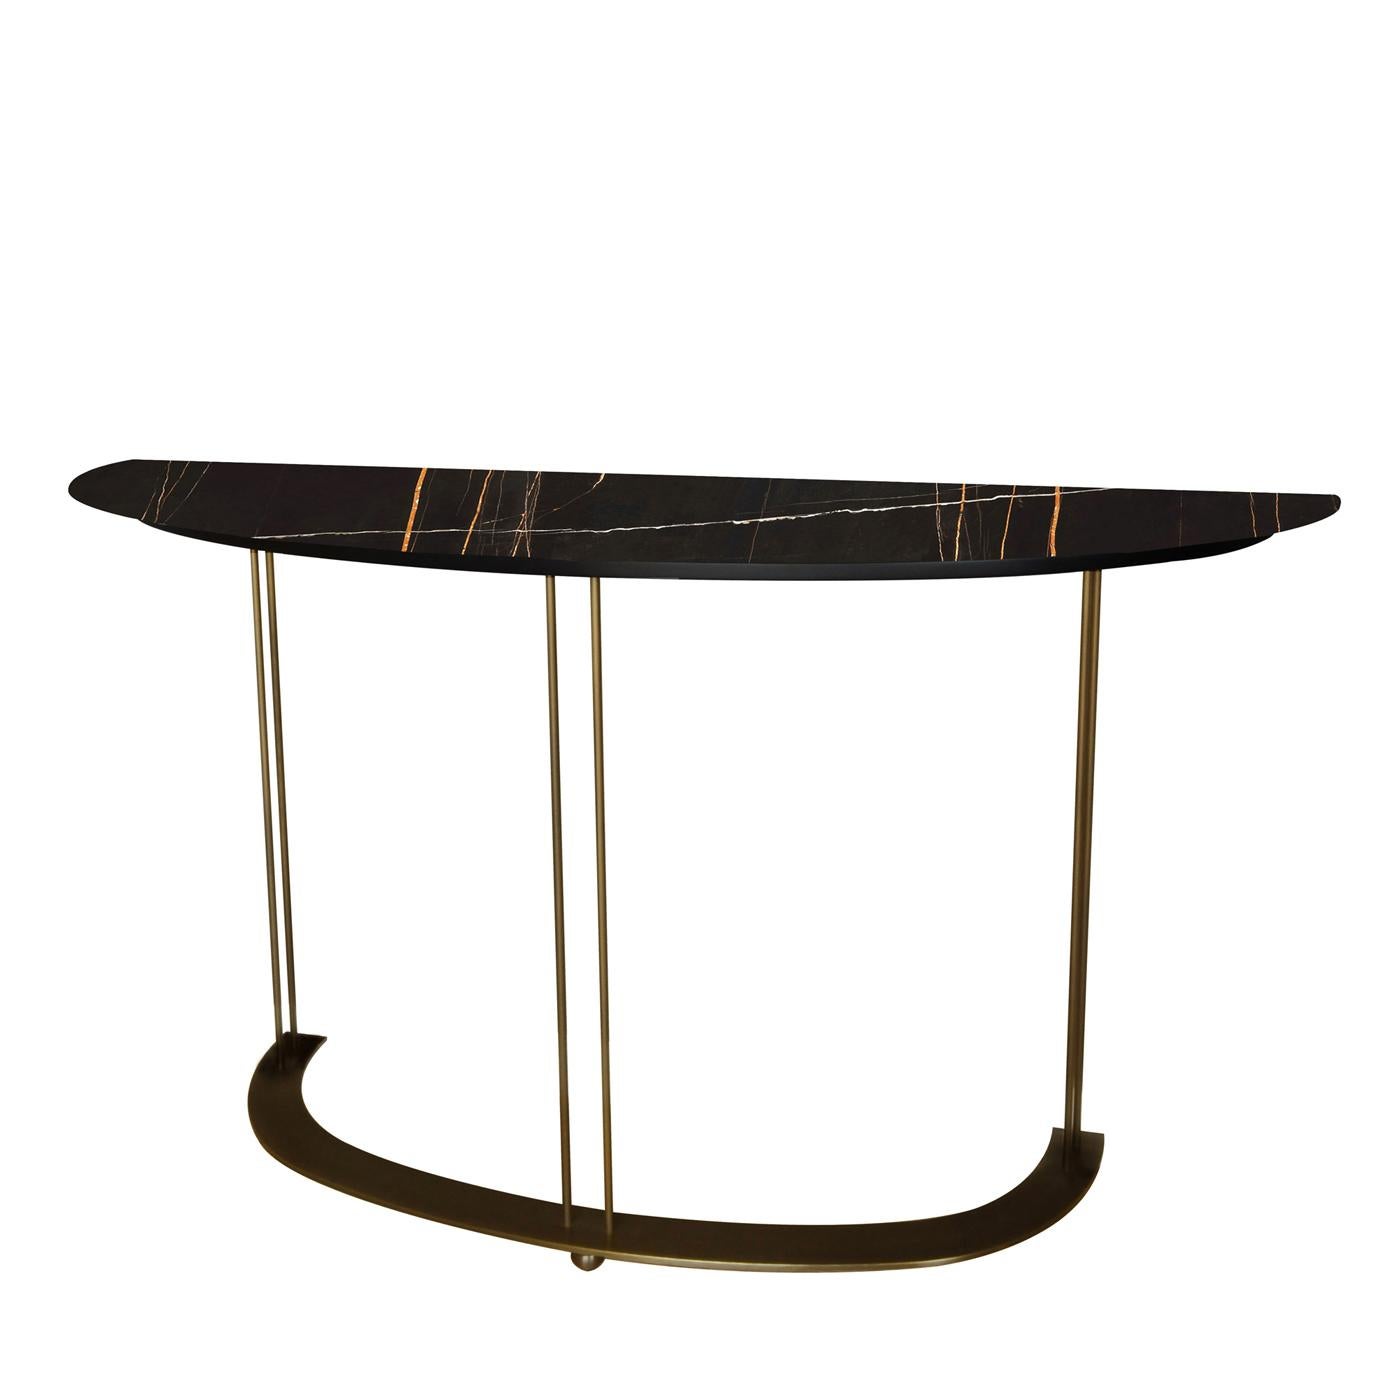 This console will be a magnificent addition to a sophisticated hallway, entryway or living room, thanks to its combination of refined materials of strong visual allure. Boasting a demilune silhouette both top and base, its structure comprises three